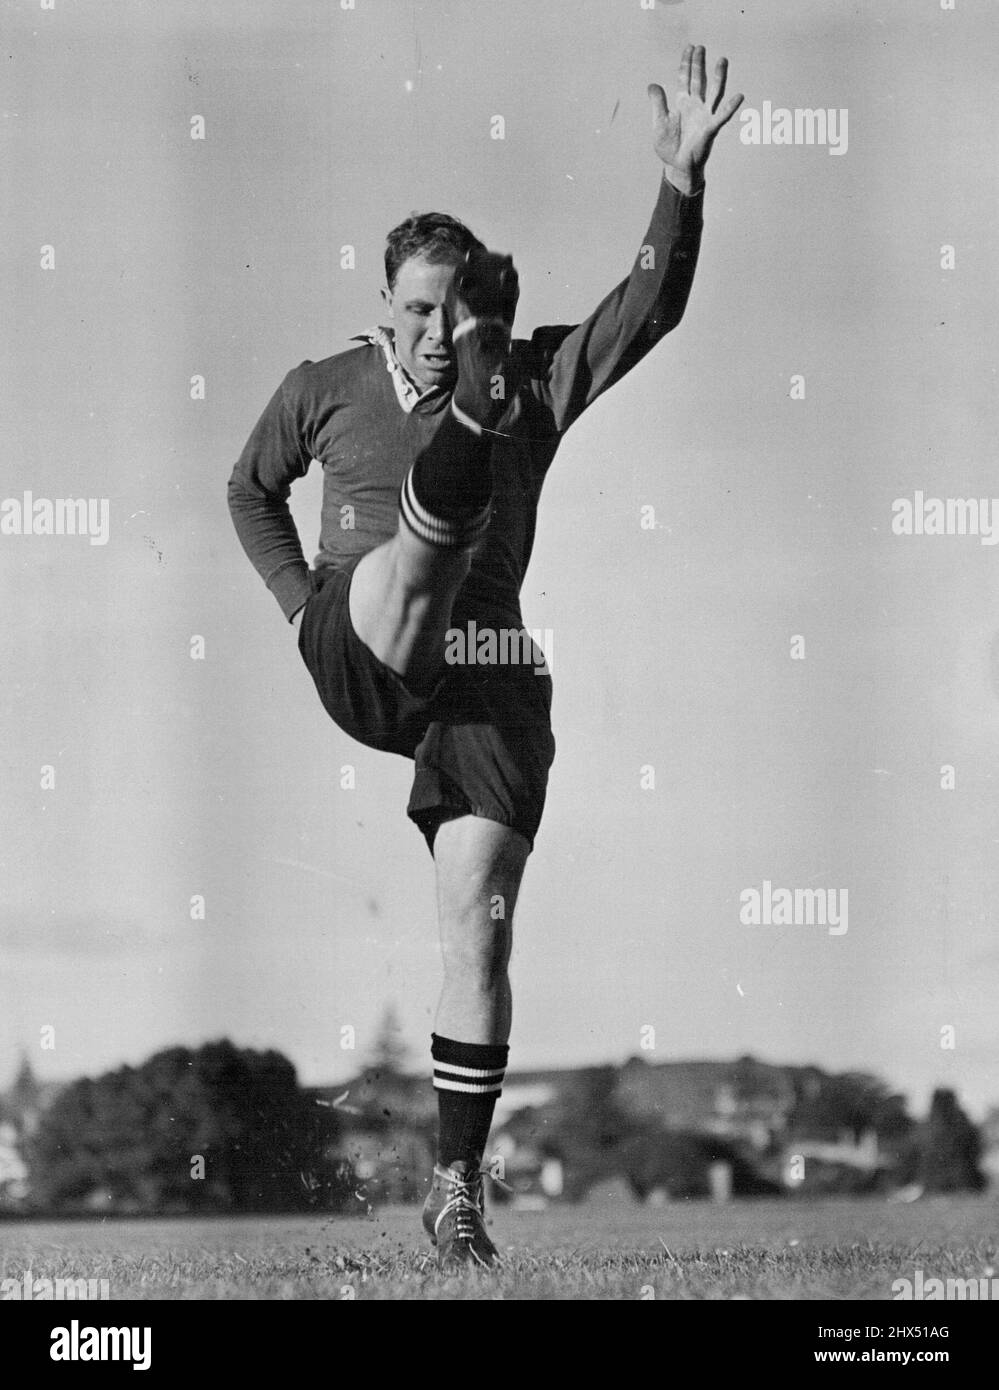 Rugby union action Black and White Stock Photos & Images - Alamy